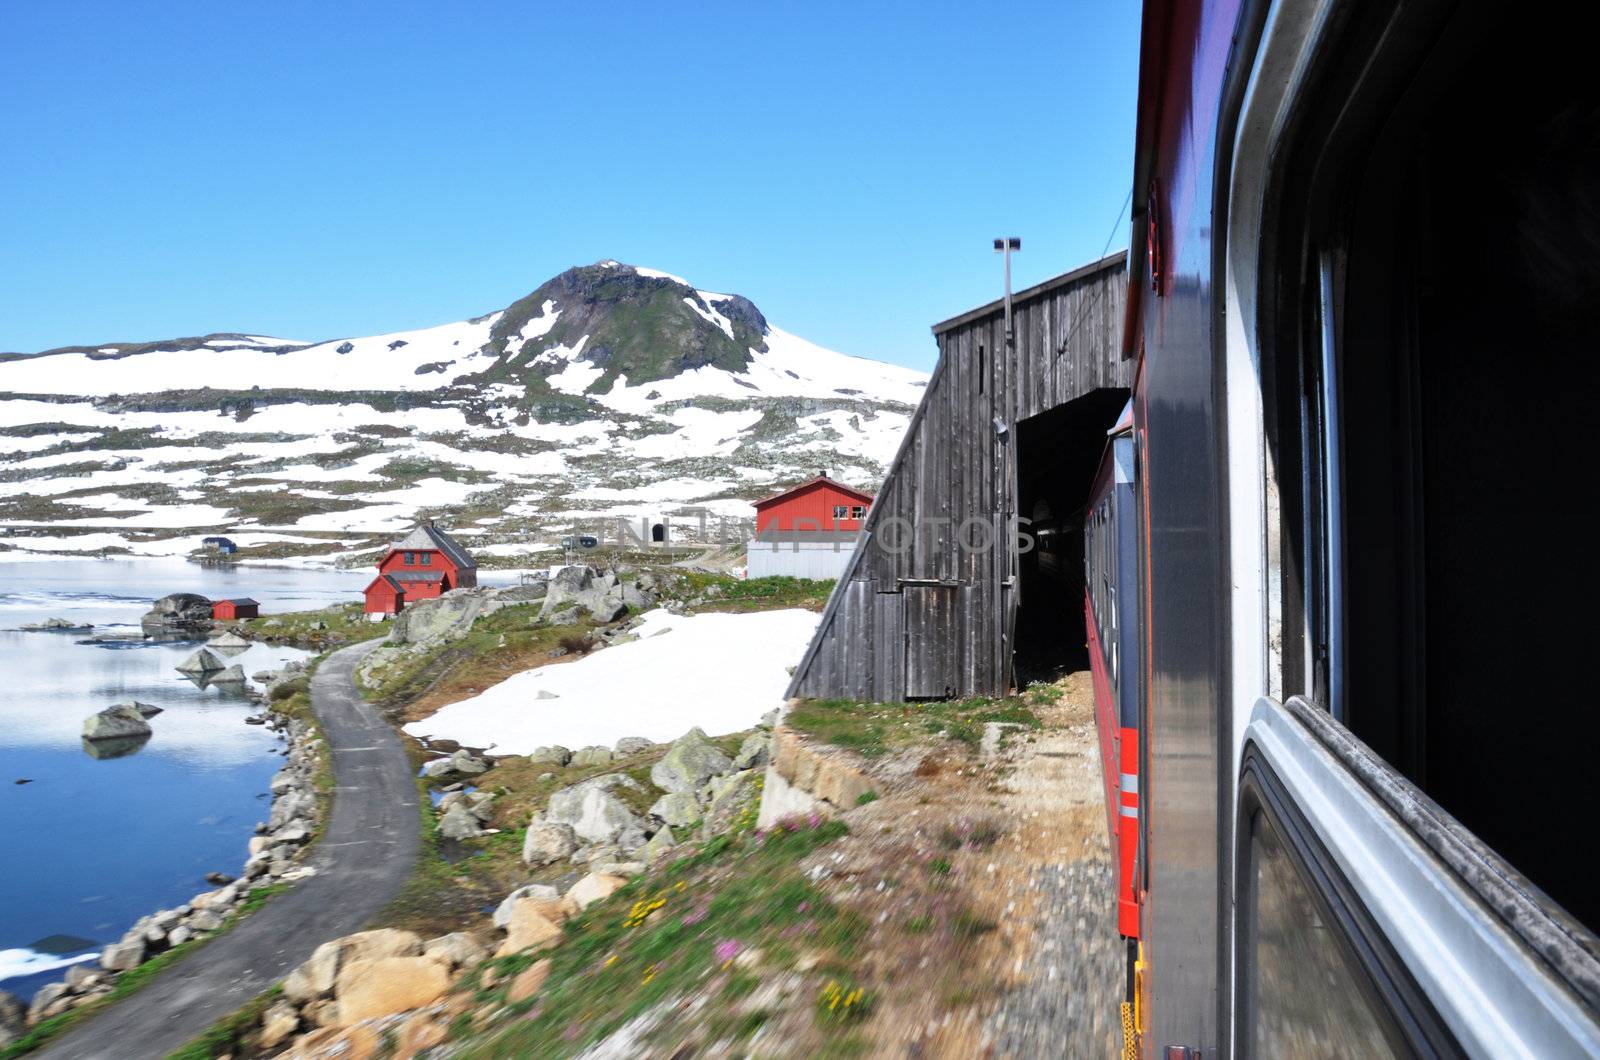 Travel by train across Norway in summer